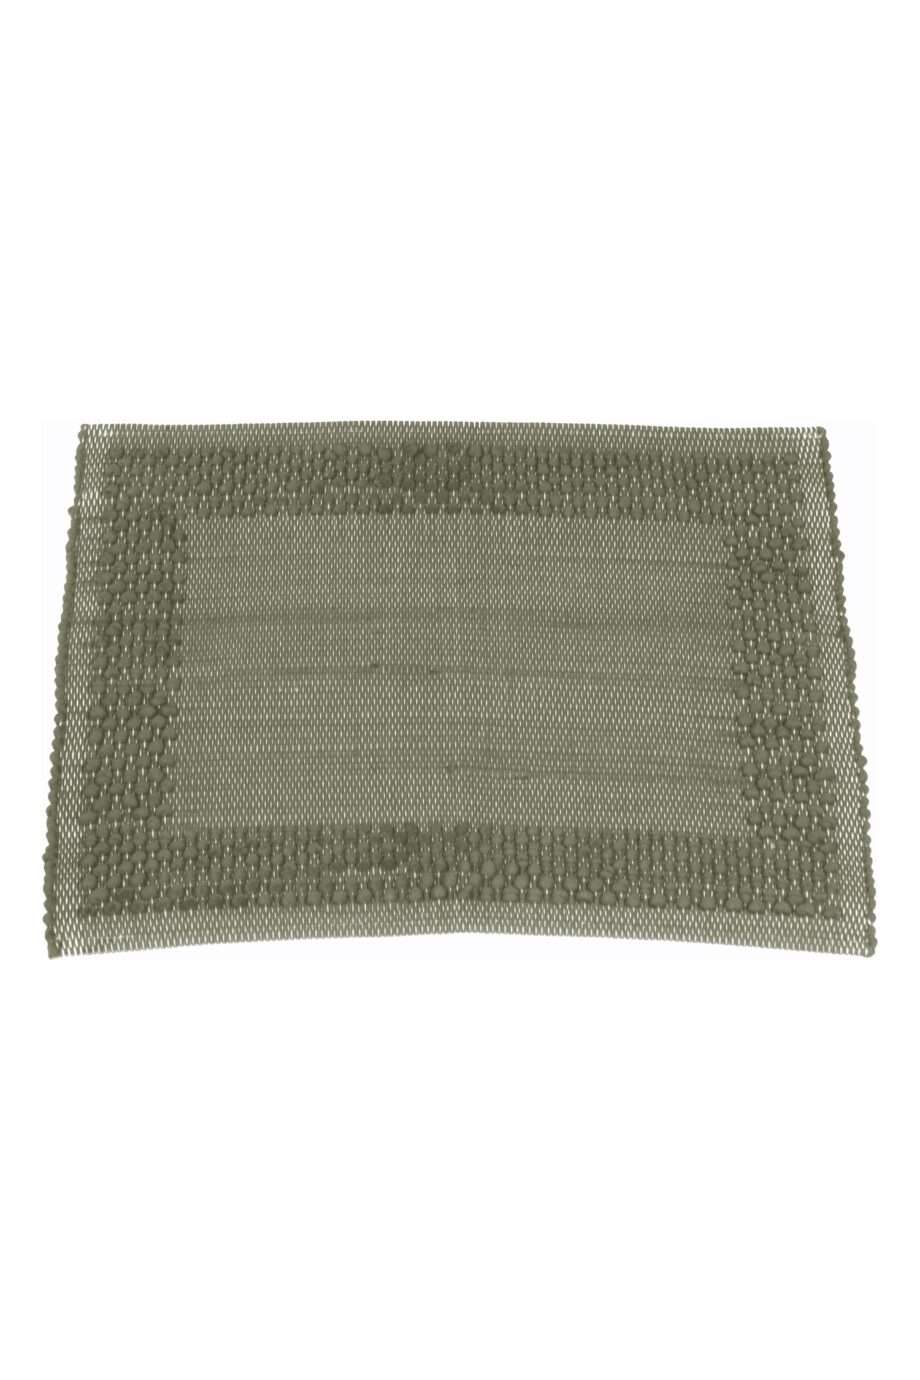 frame olive green woven cotton placemat small